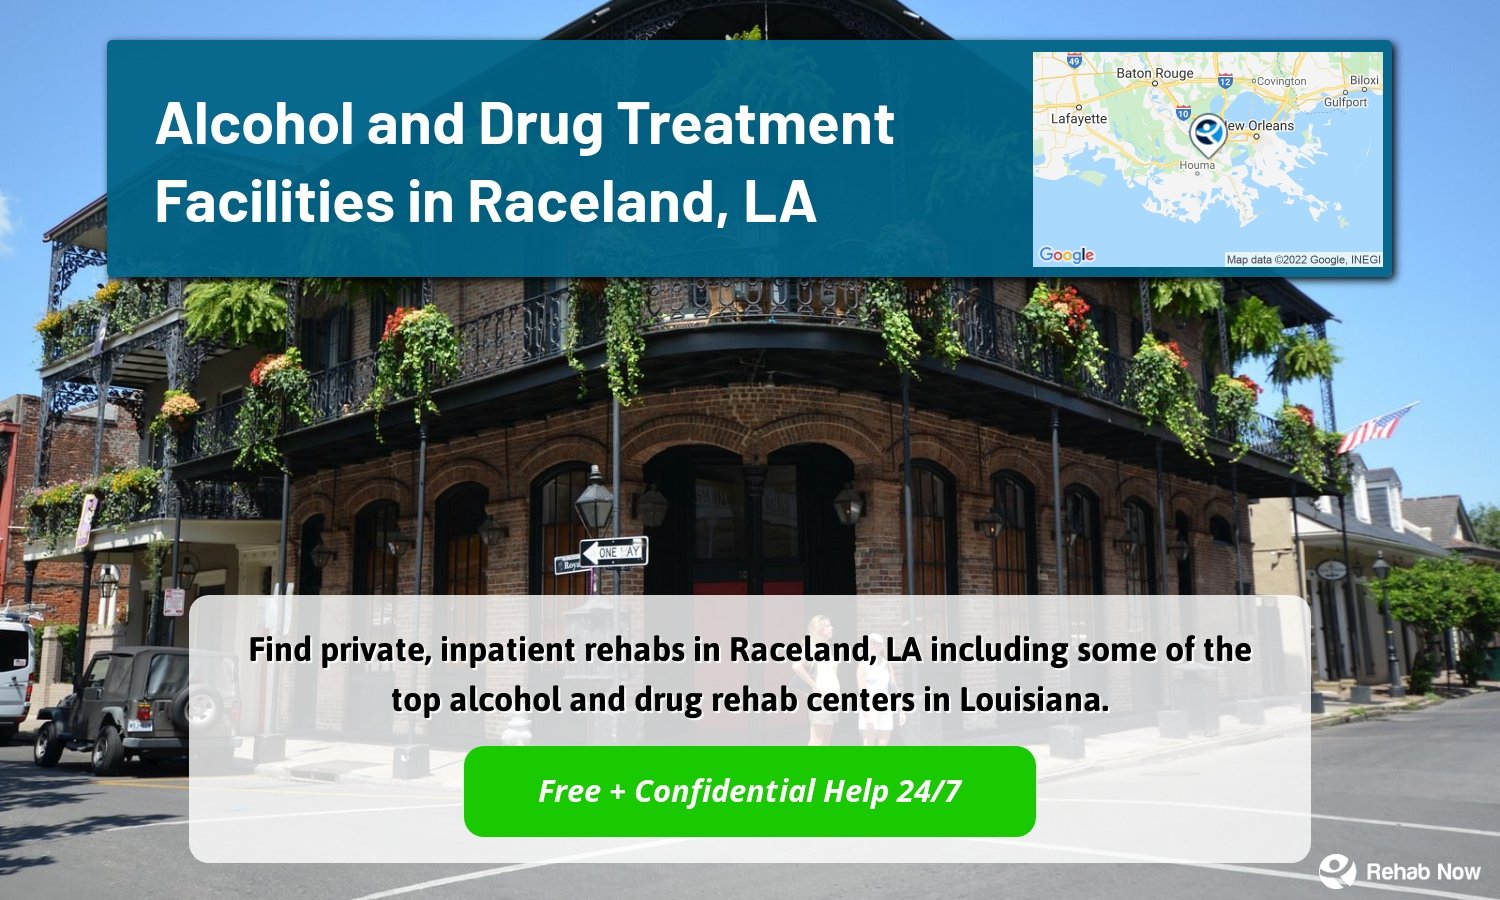 Find private, inpatient rehabs in Raceland, LA including some of the top alcohol and drug rehab centers in Louisiana.